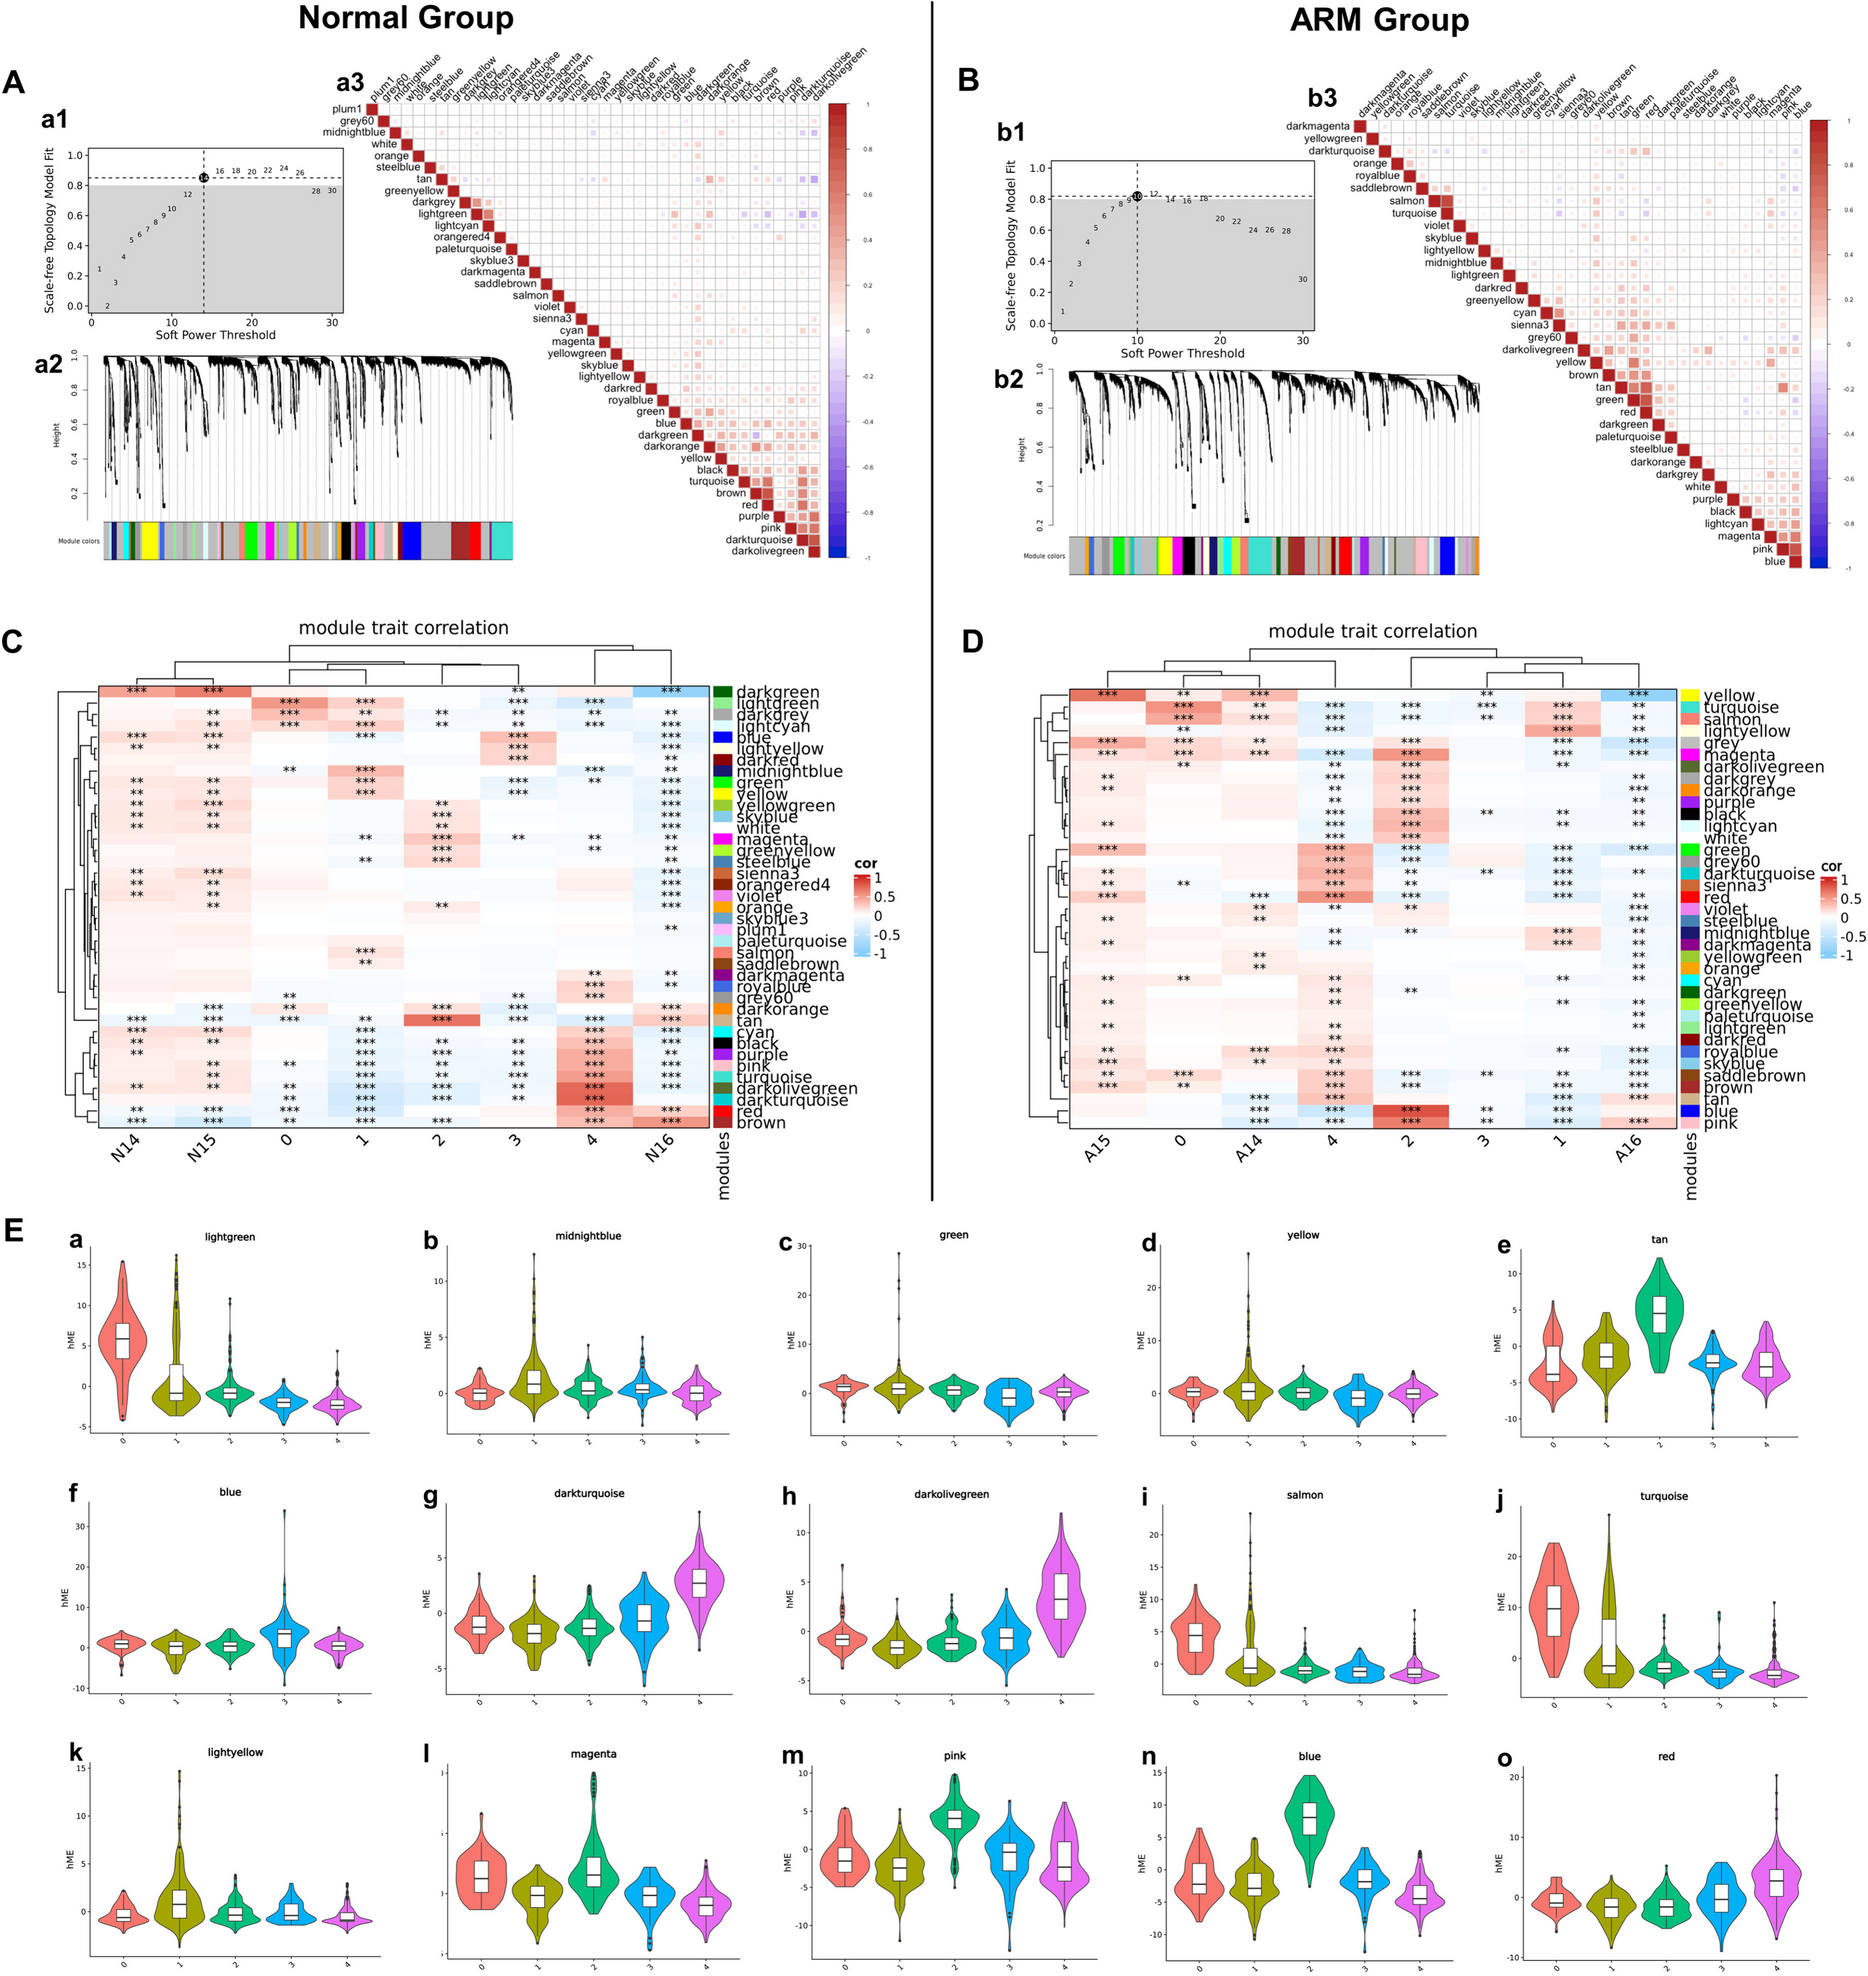 Spatial transcriptomics reveals gene interactions and signaling pathway dynamics in rat embryos with anorectal malformation